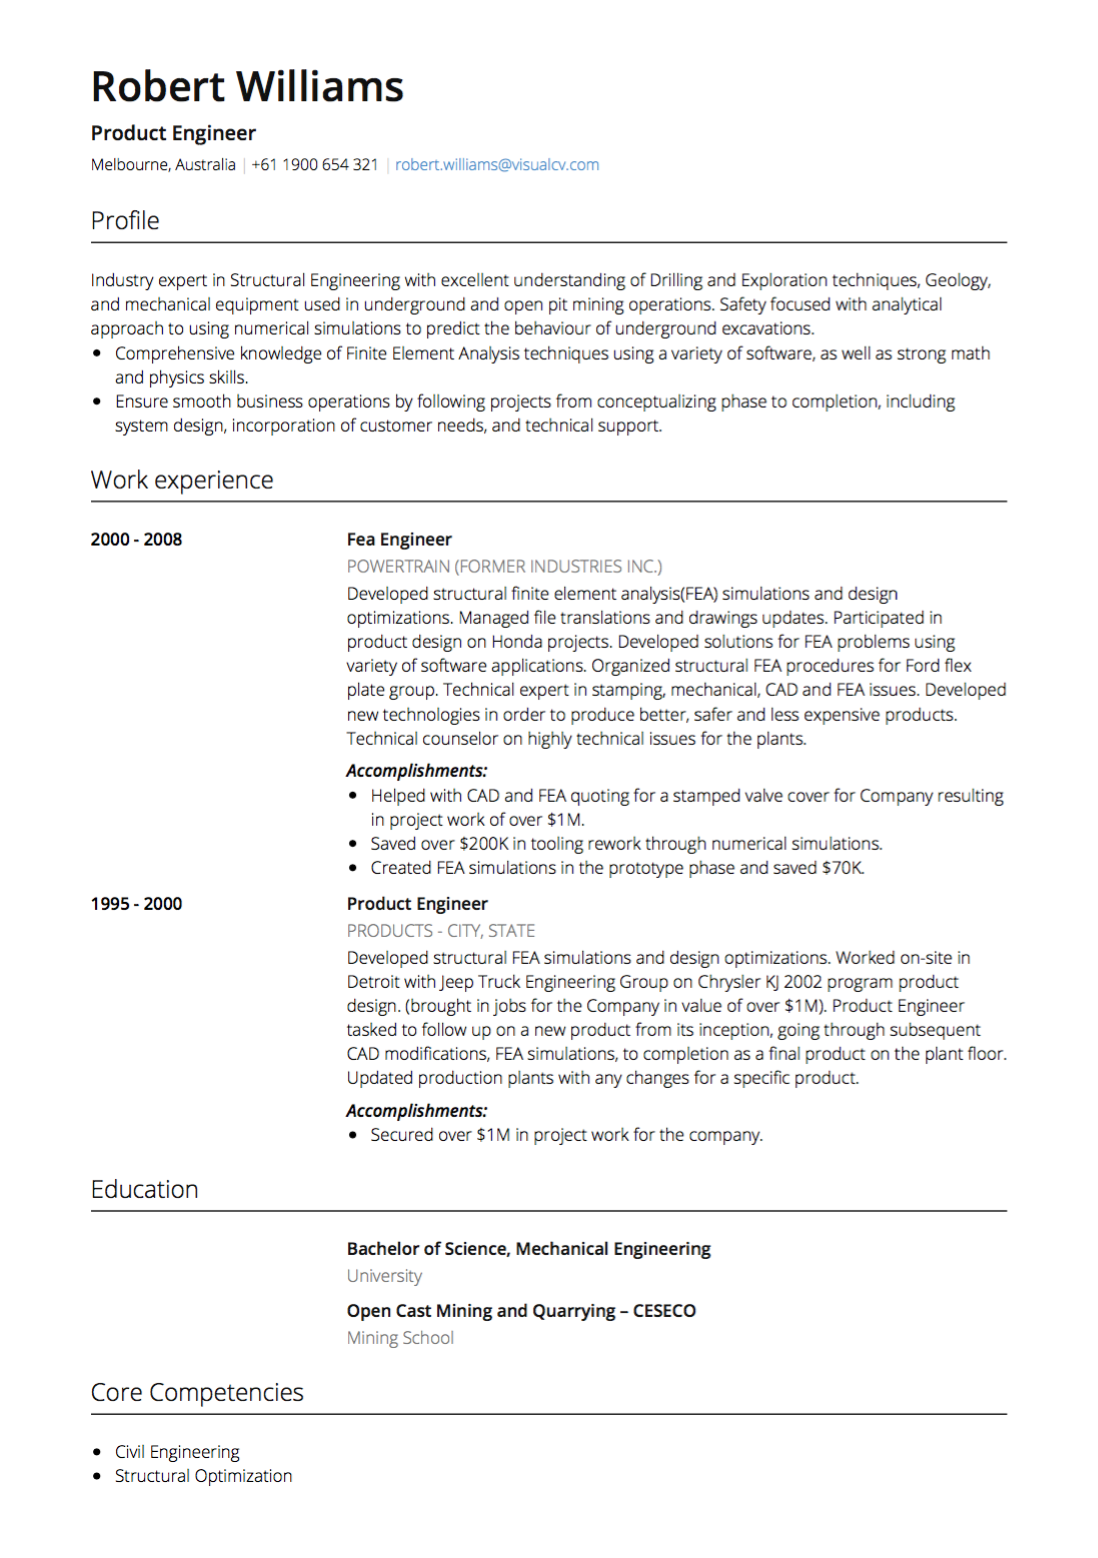 Proper Resume Format 2019 from images.ctfassets.net